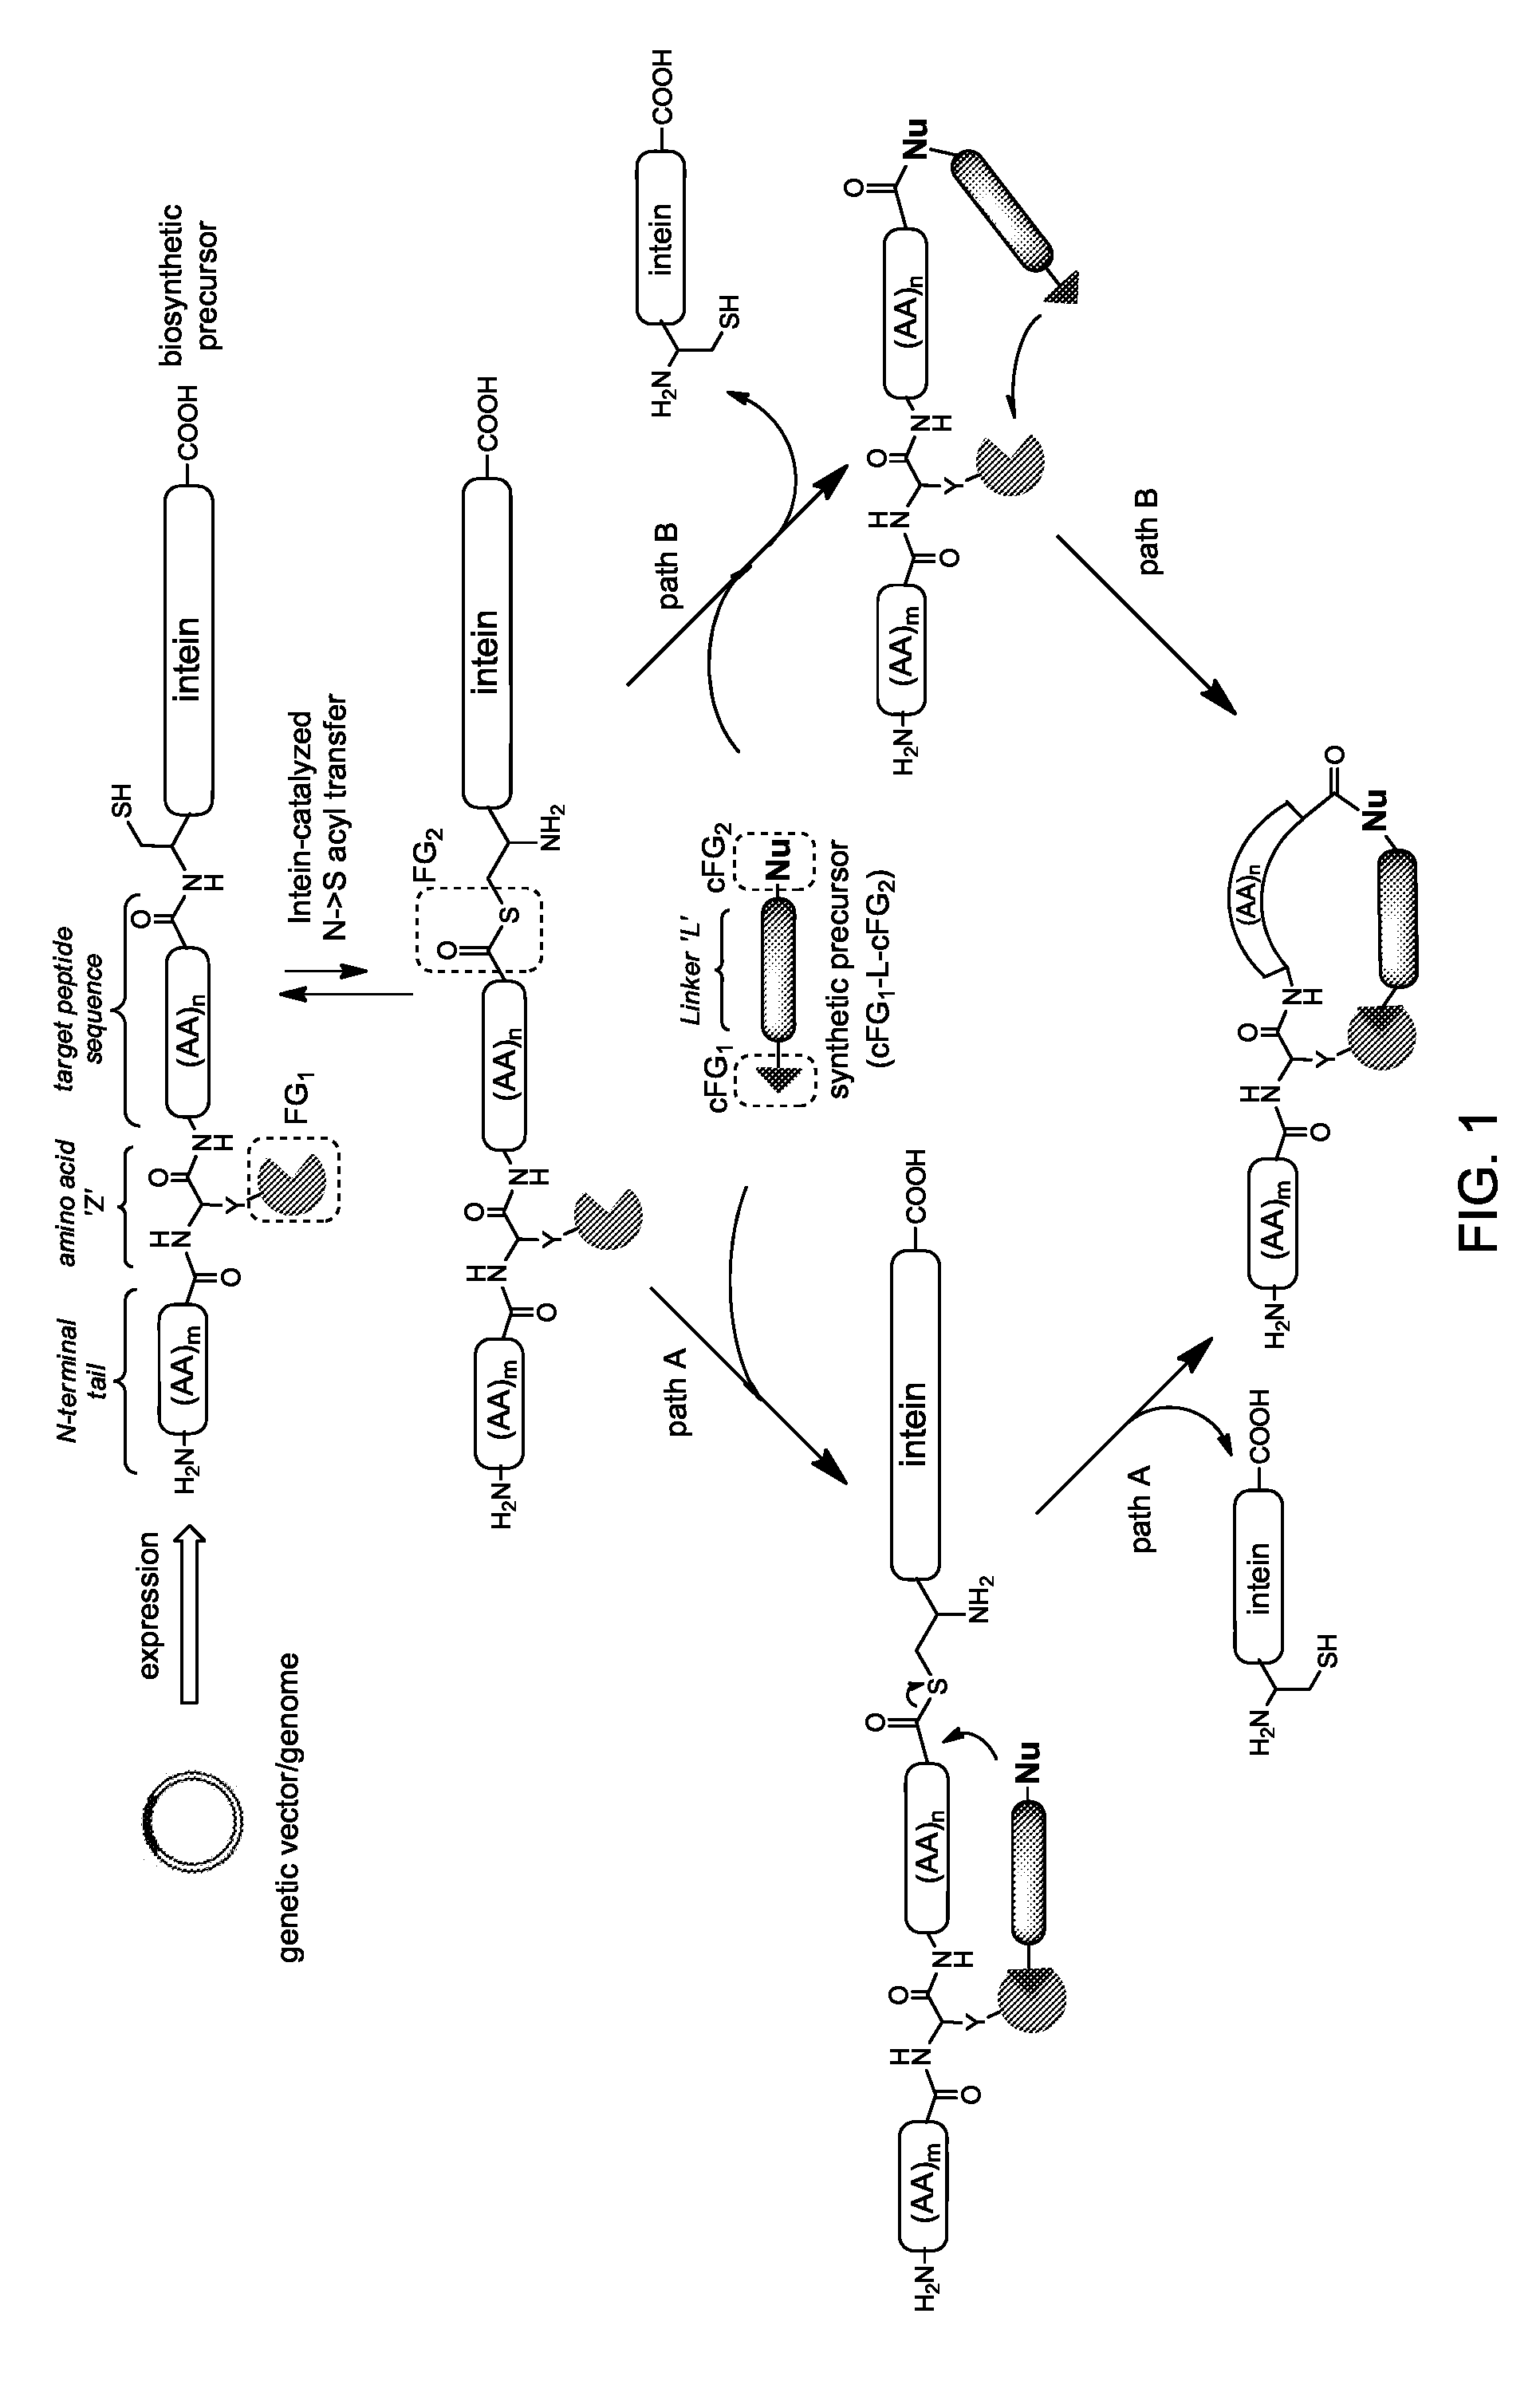 Macrocyclic compounds with a hybrid peptidic/non-peptidic backbone and methods for their preparation